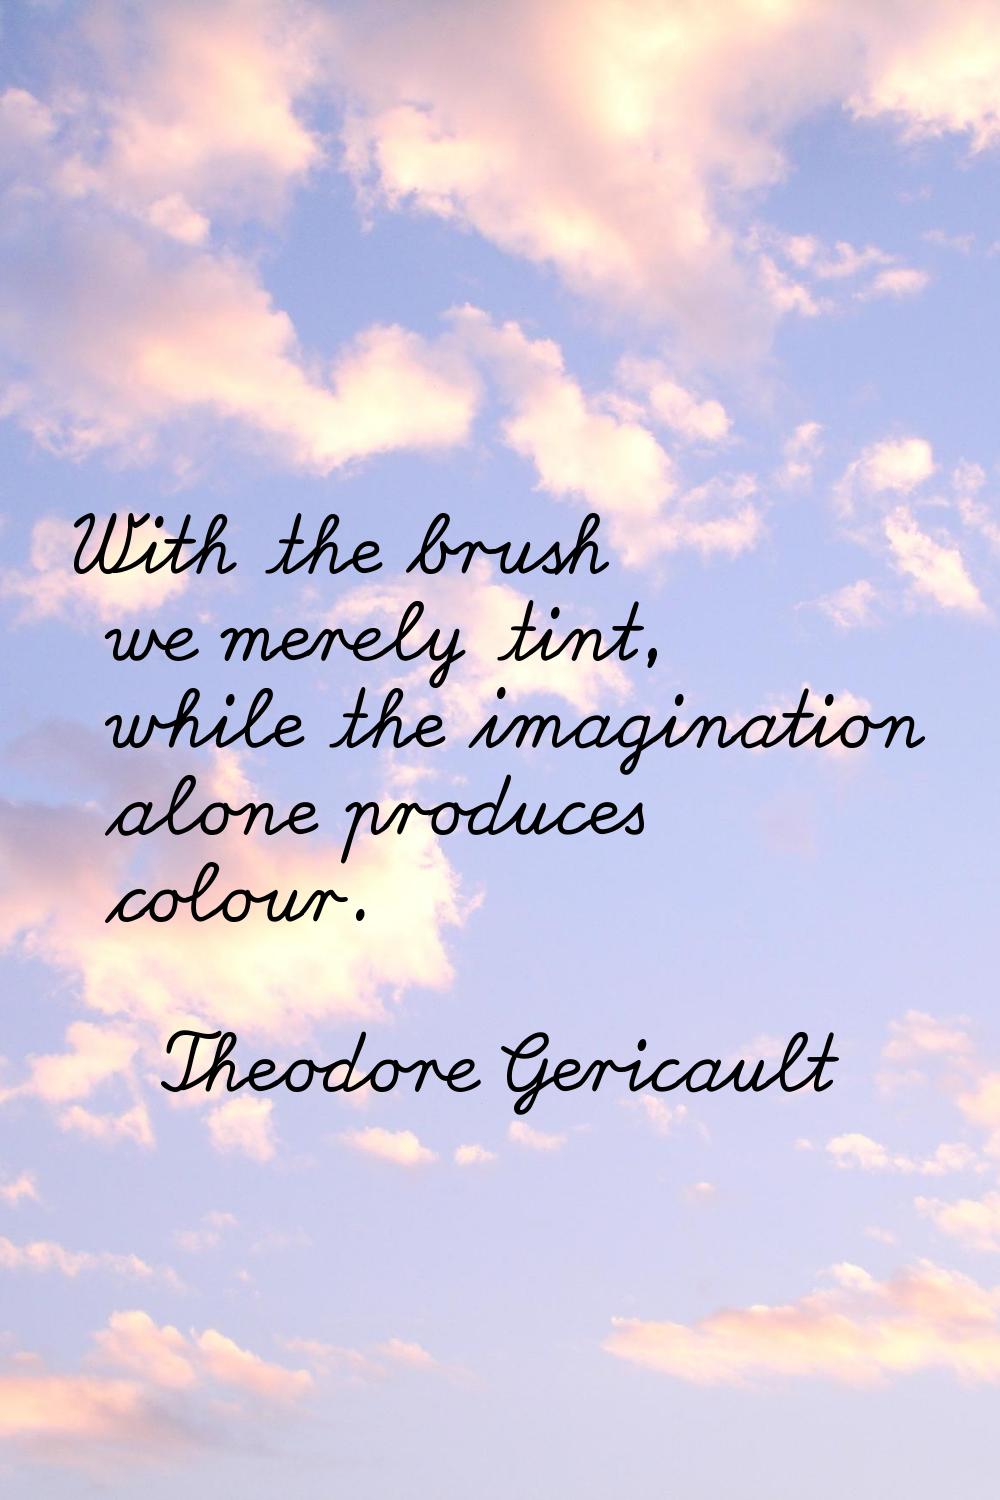 With the brush we merely tint, while the imagination alone produces colour.